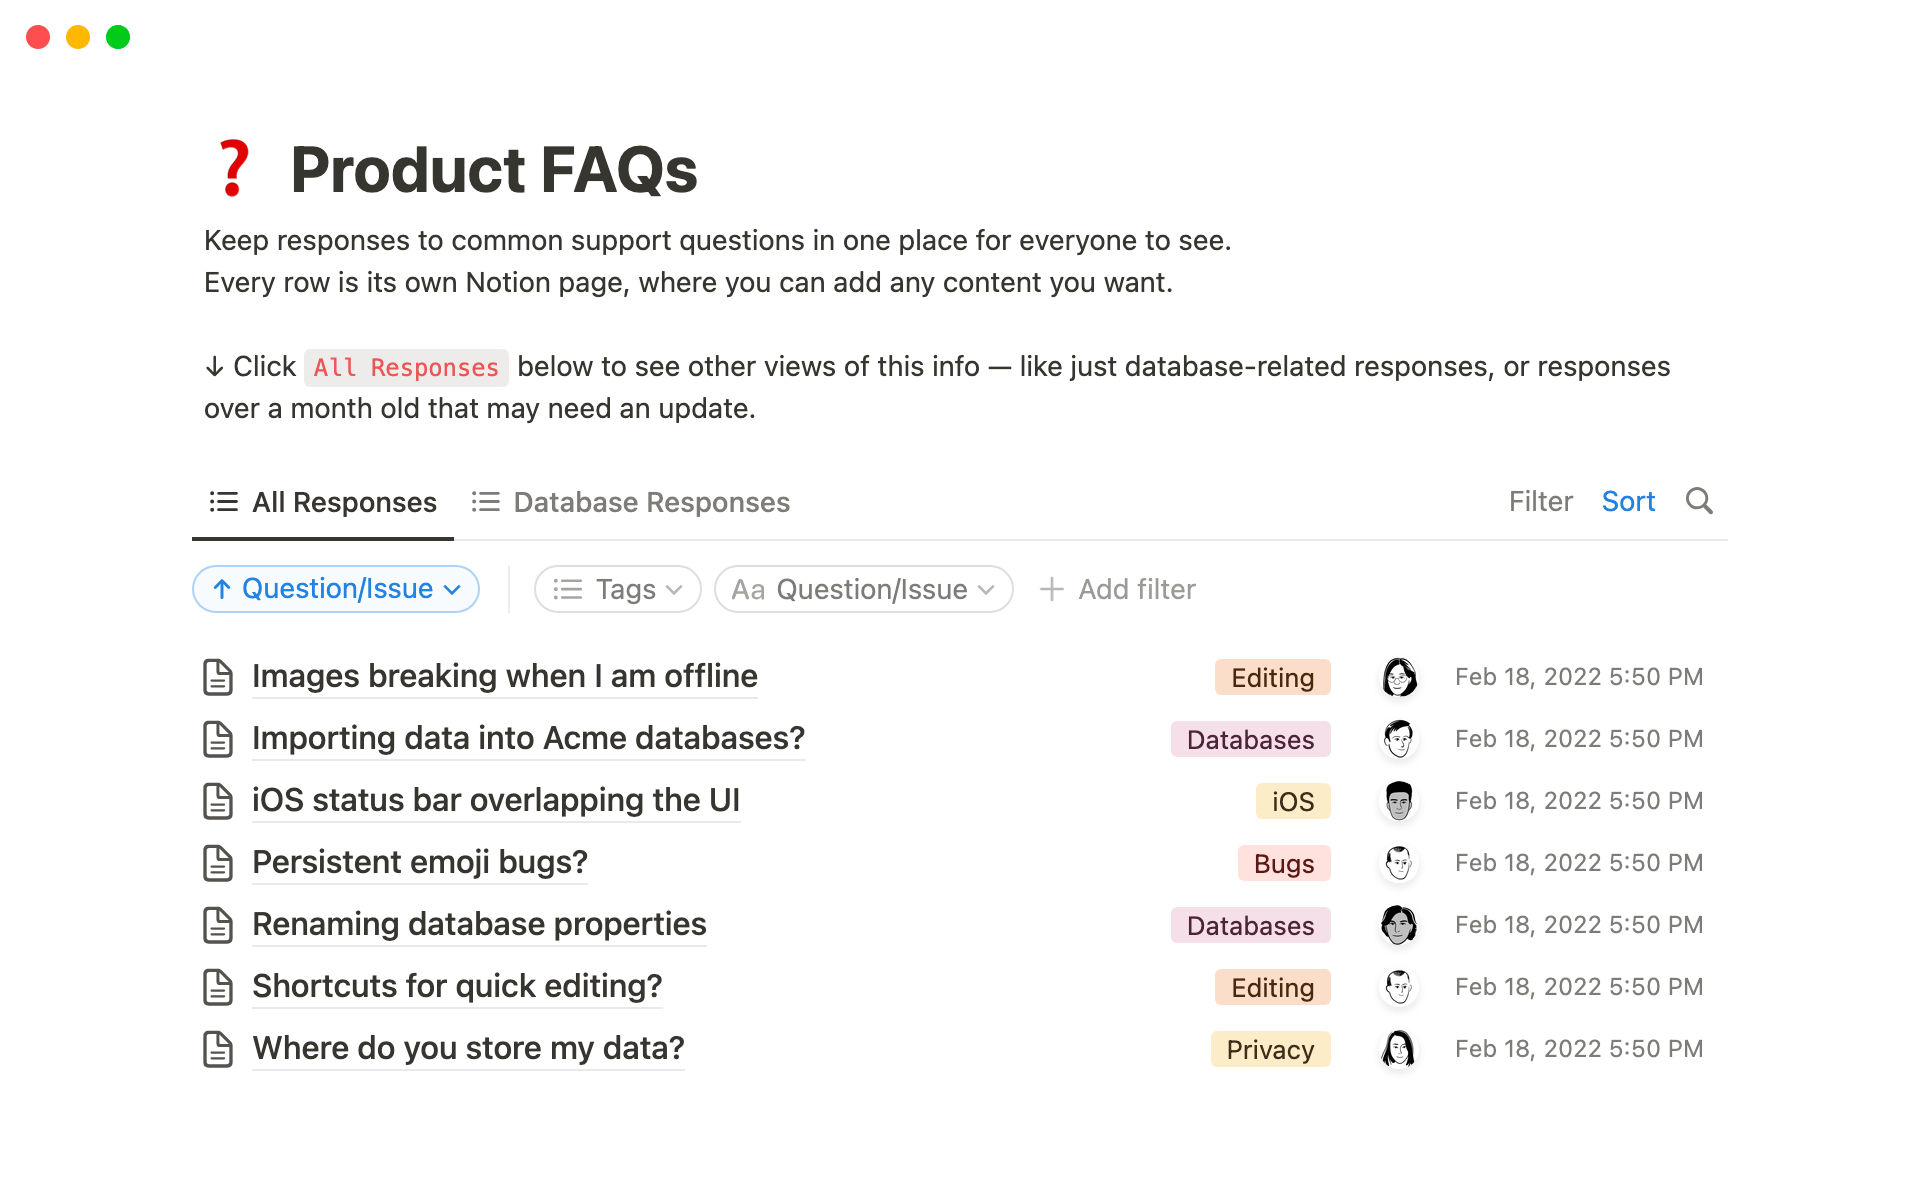 The desktop image for the Product FAQs template